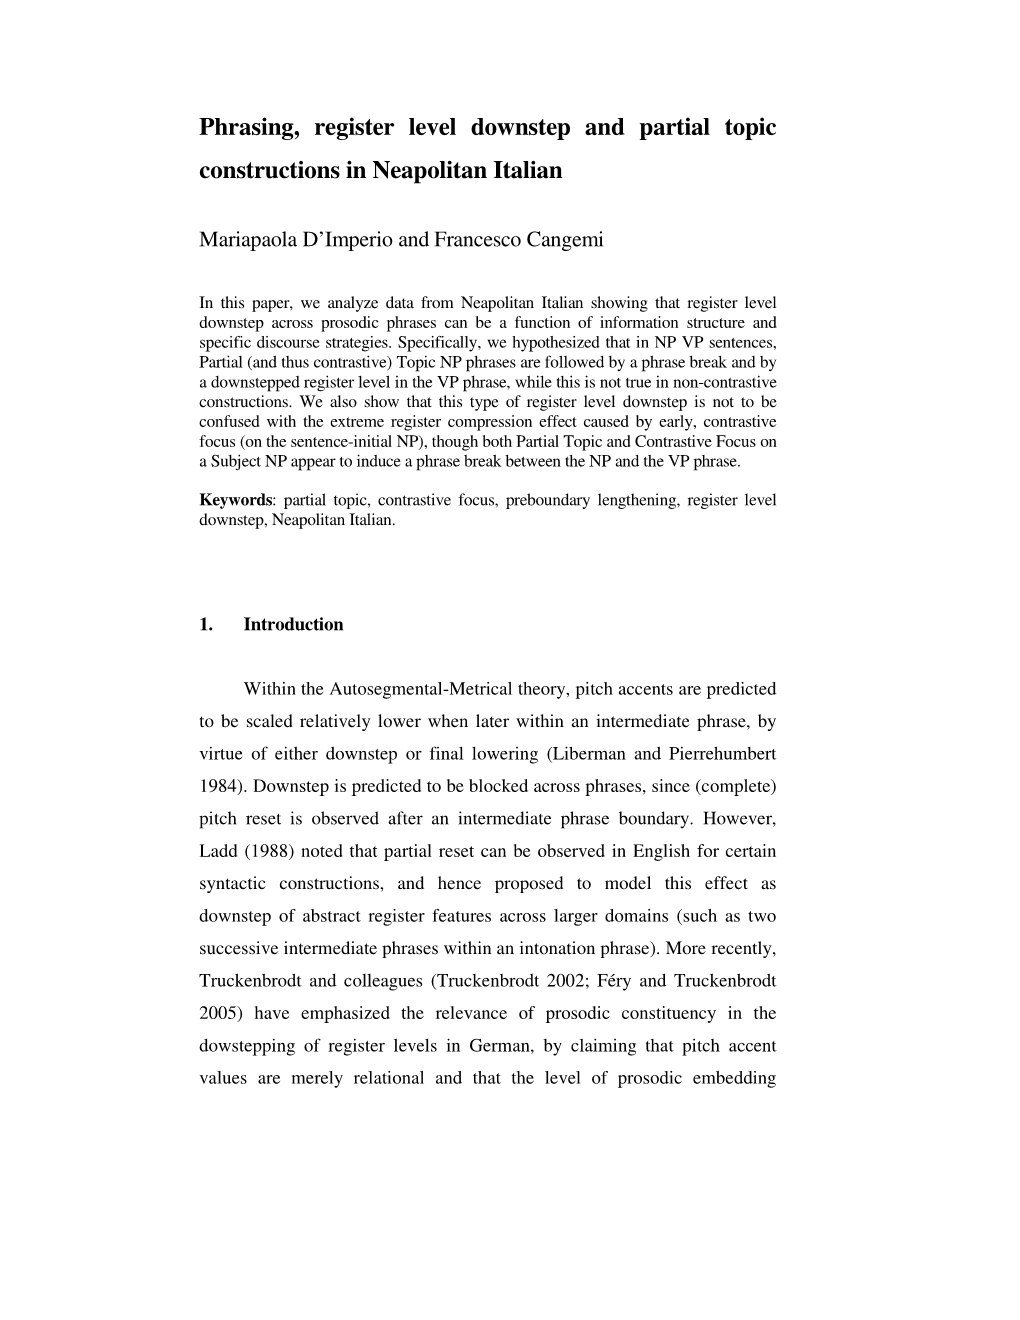 Phrasing, Register Level Downstep and Partial Topic Constructions in Neapolitan Italian